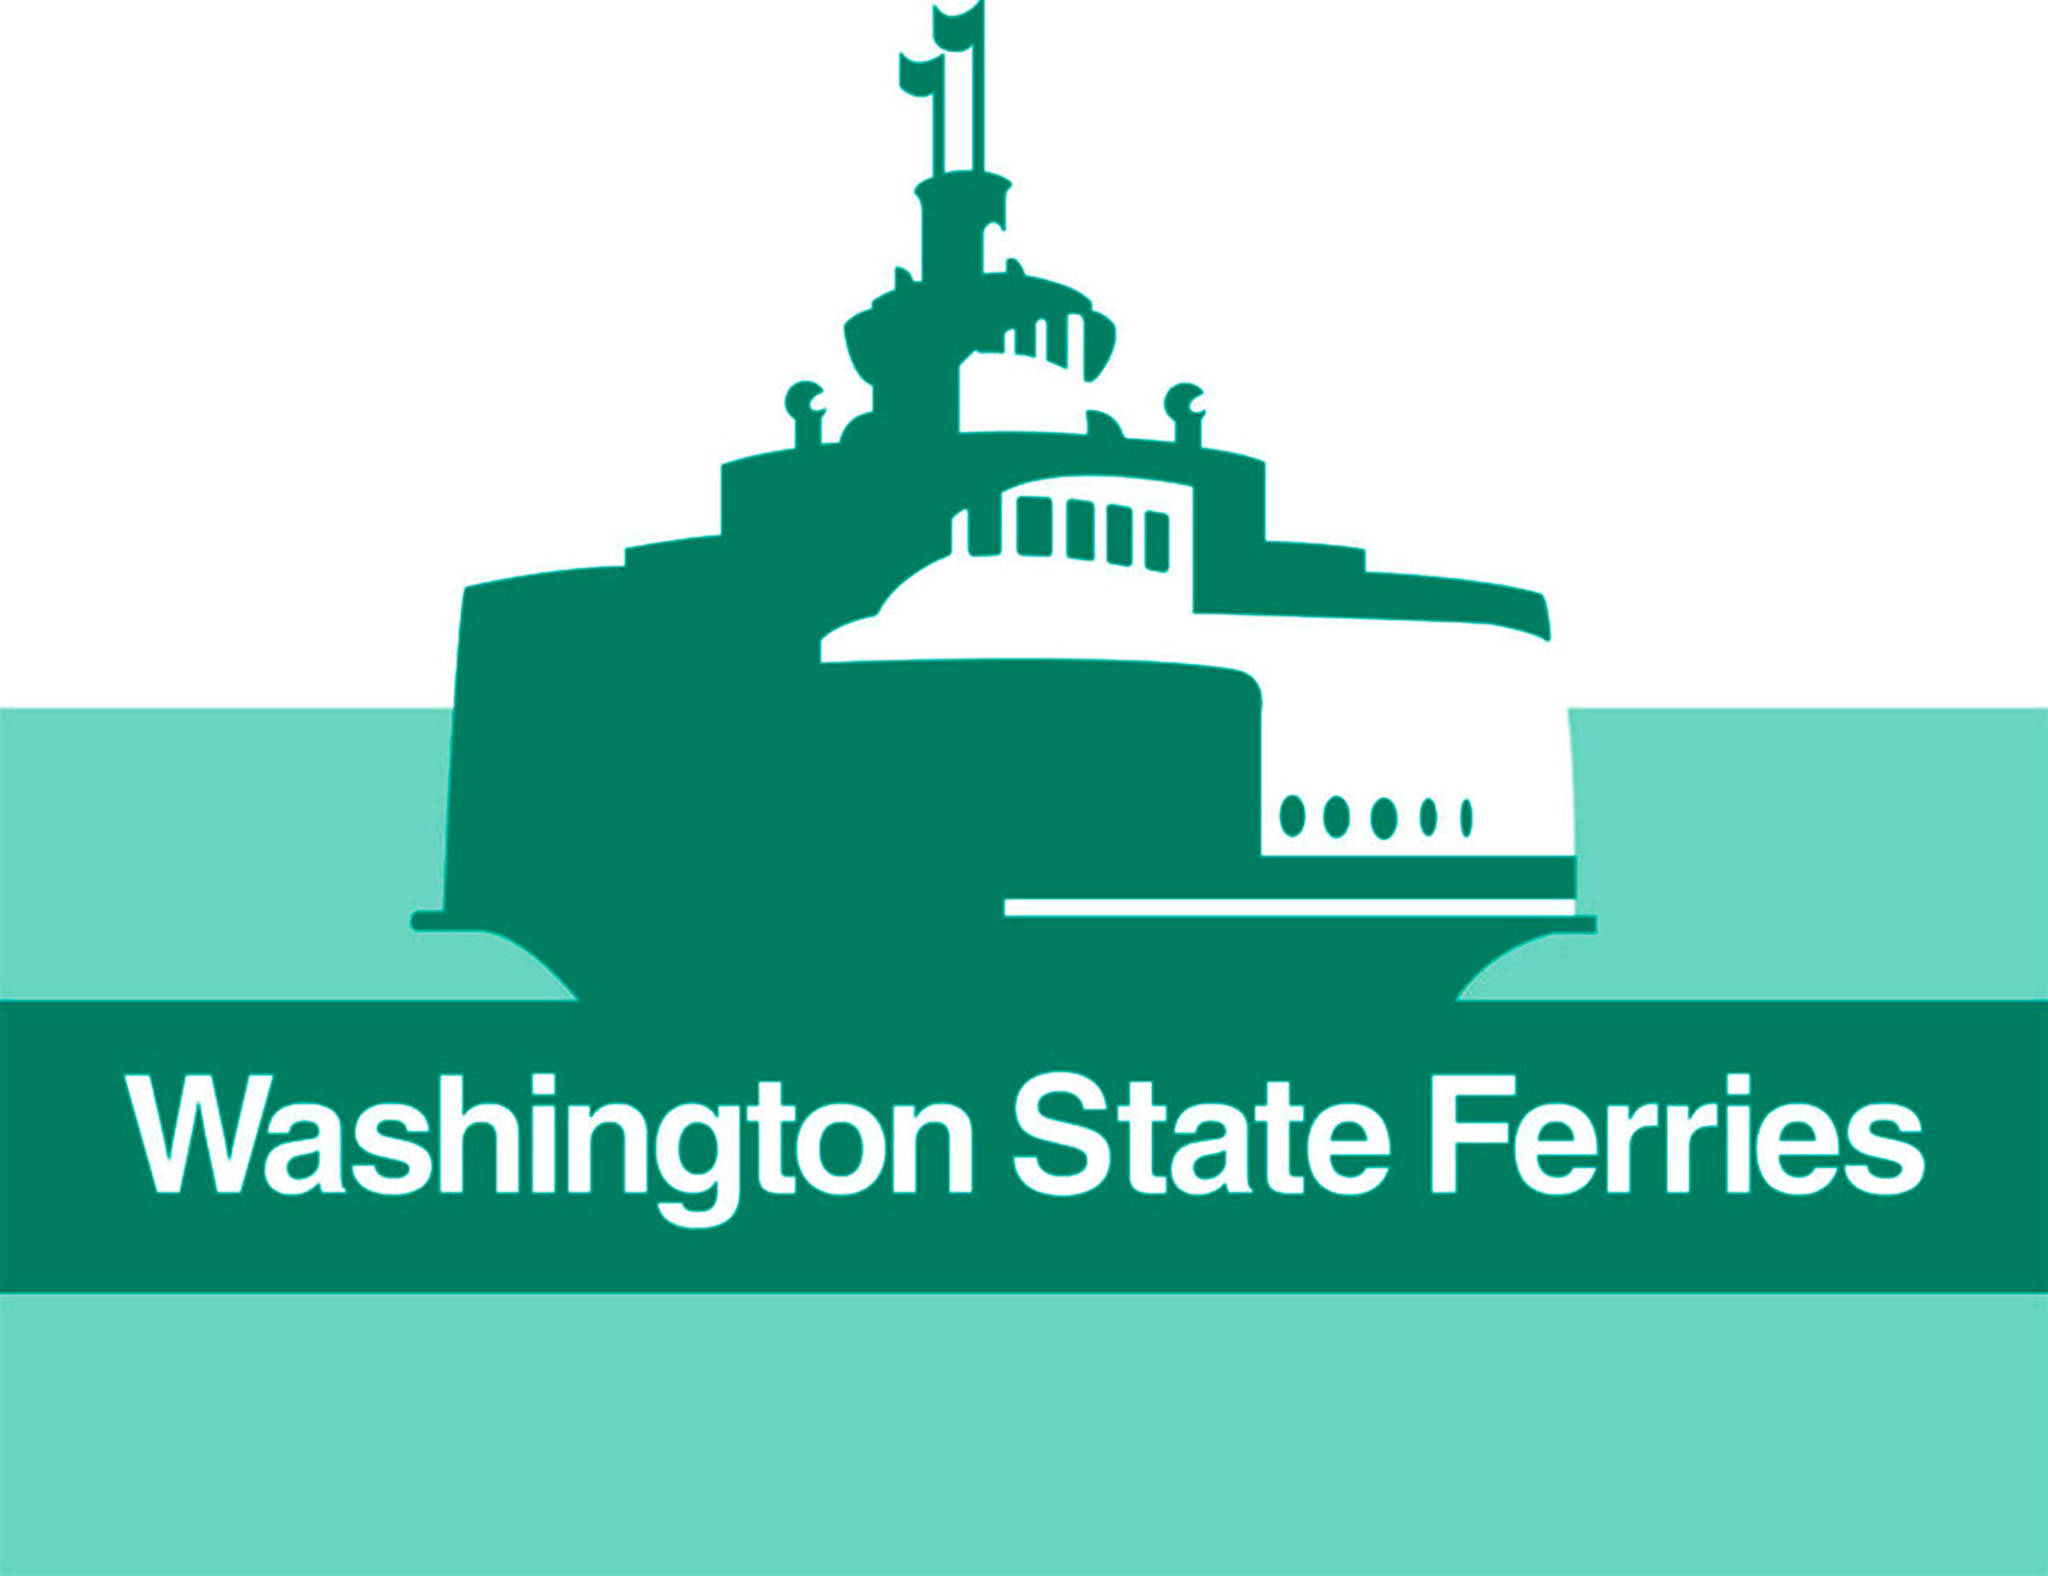 Washington State Ferries calls for new vessels in long-range plan